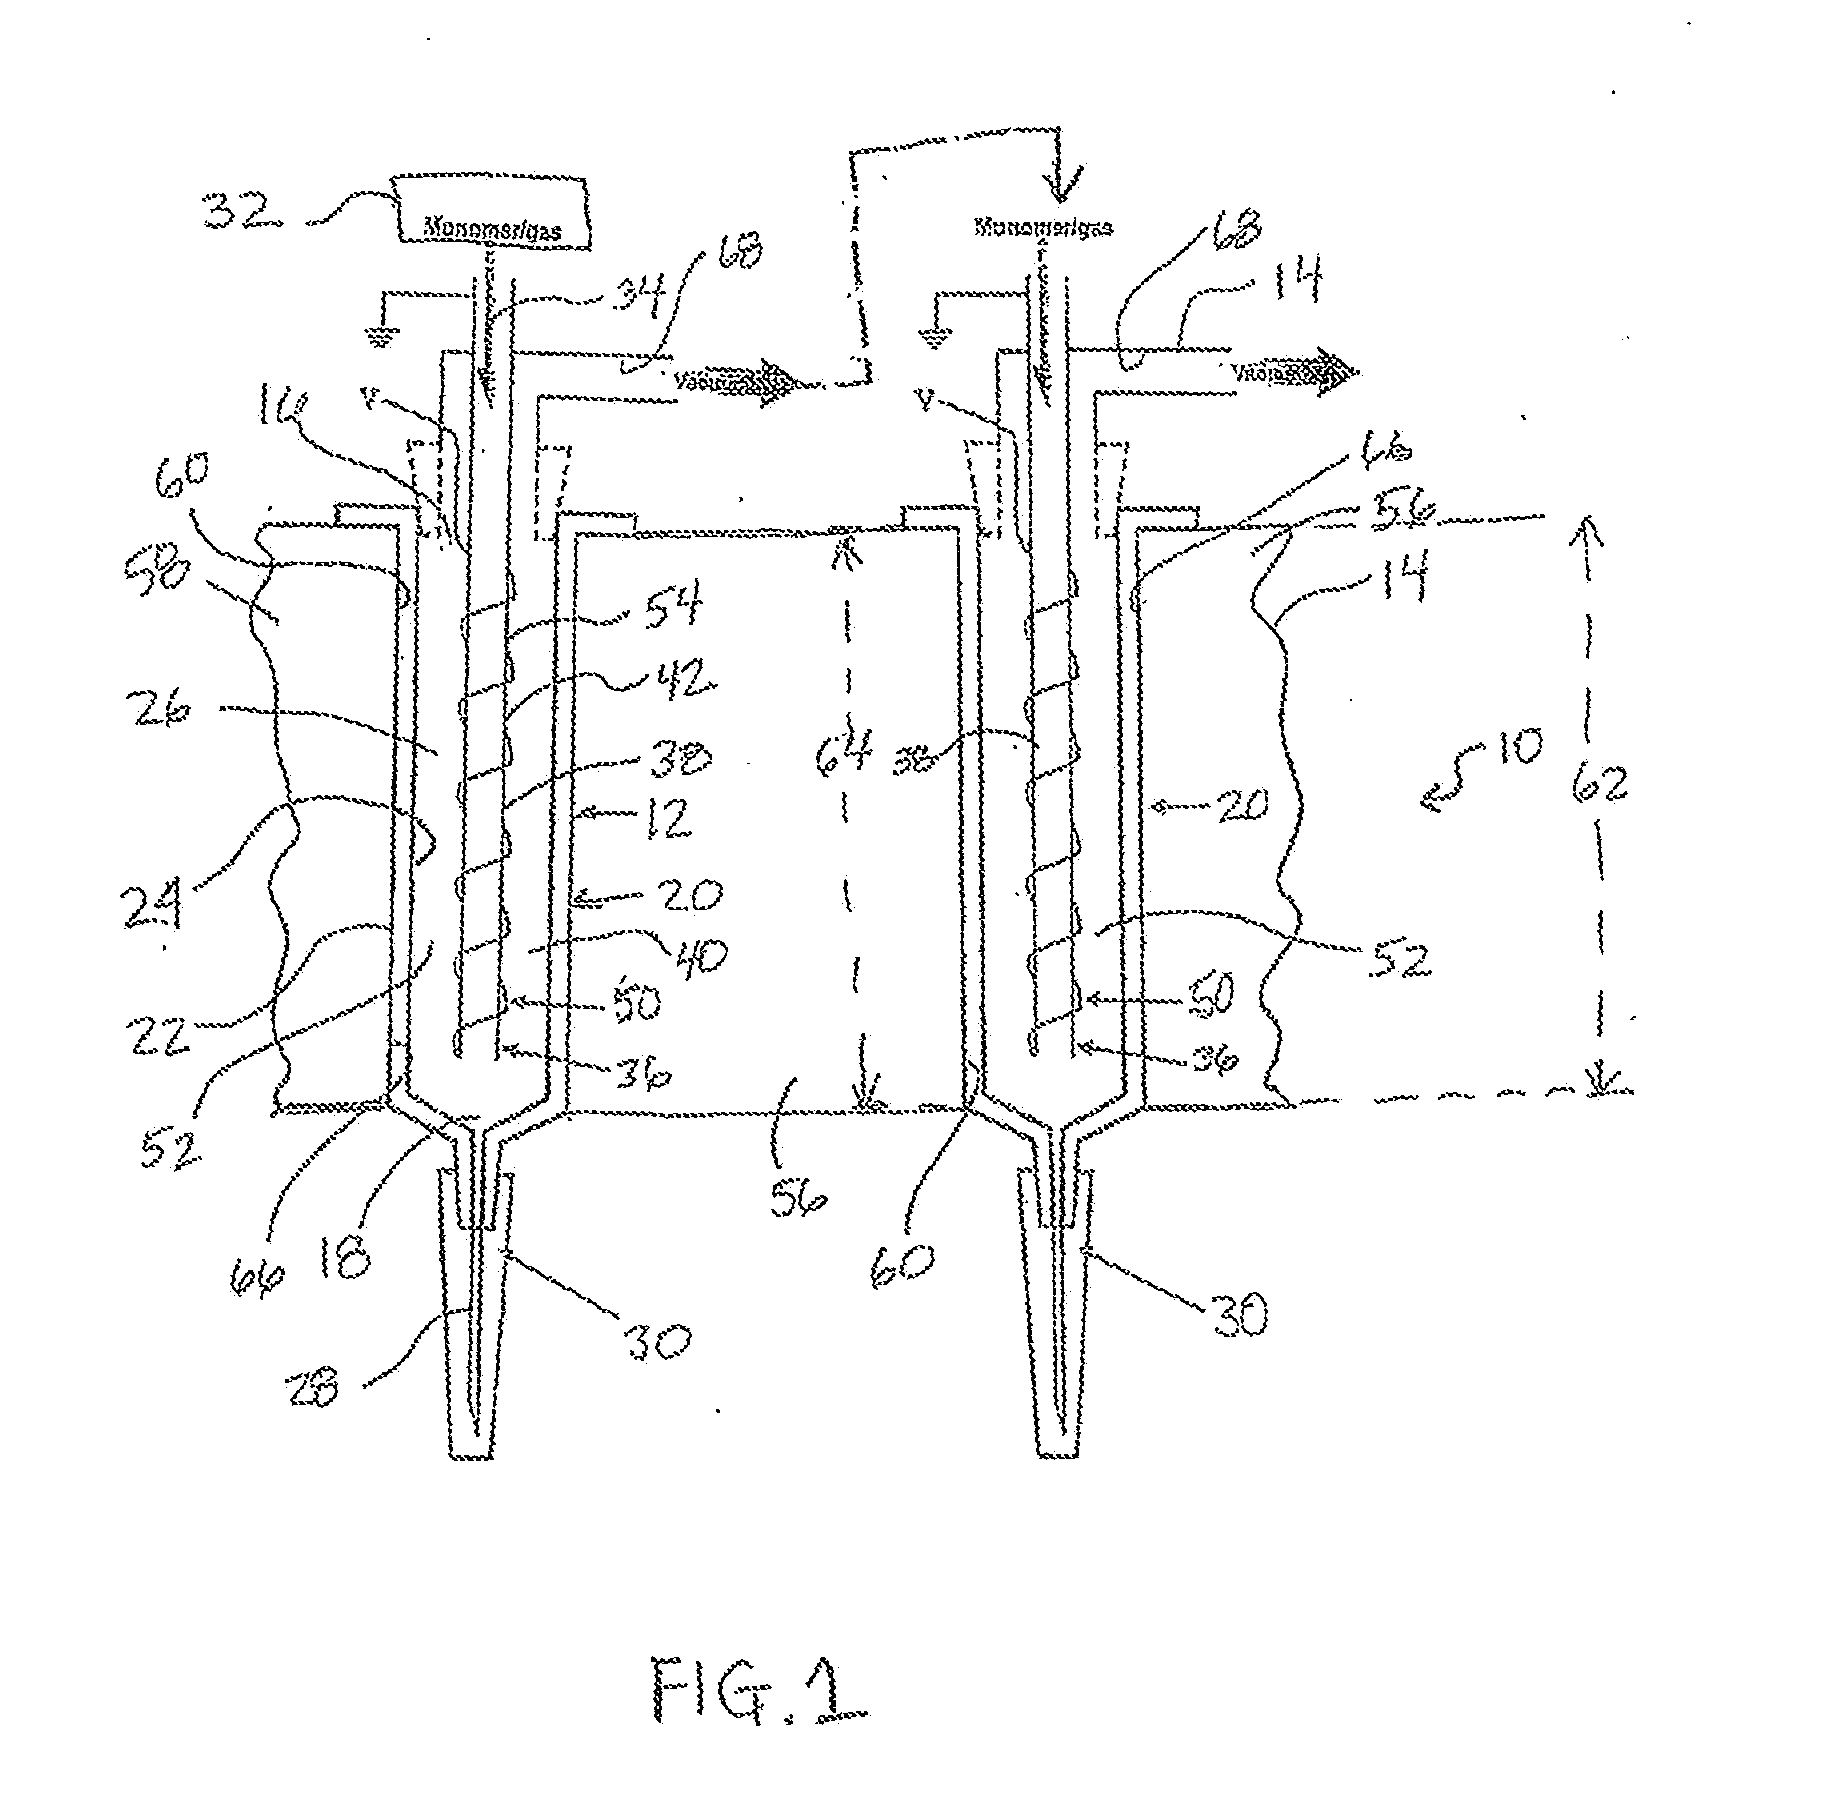 Systems, Apparatus and Methods for Coating the Interior of a Container Using a Photolysis and/or Thermal Chemical Vapor Deposition Process